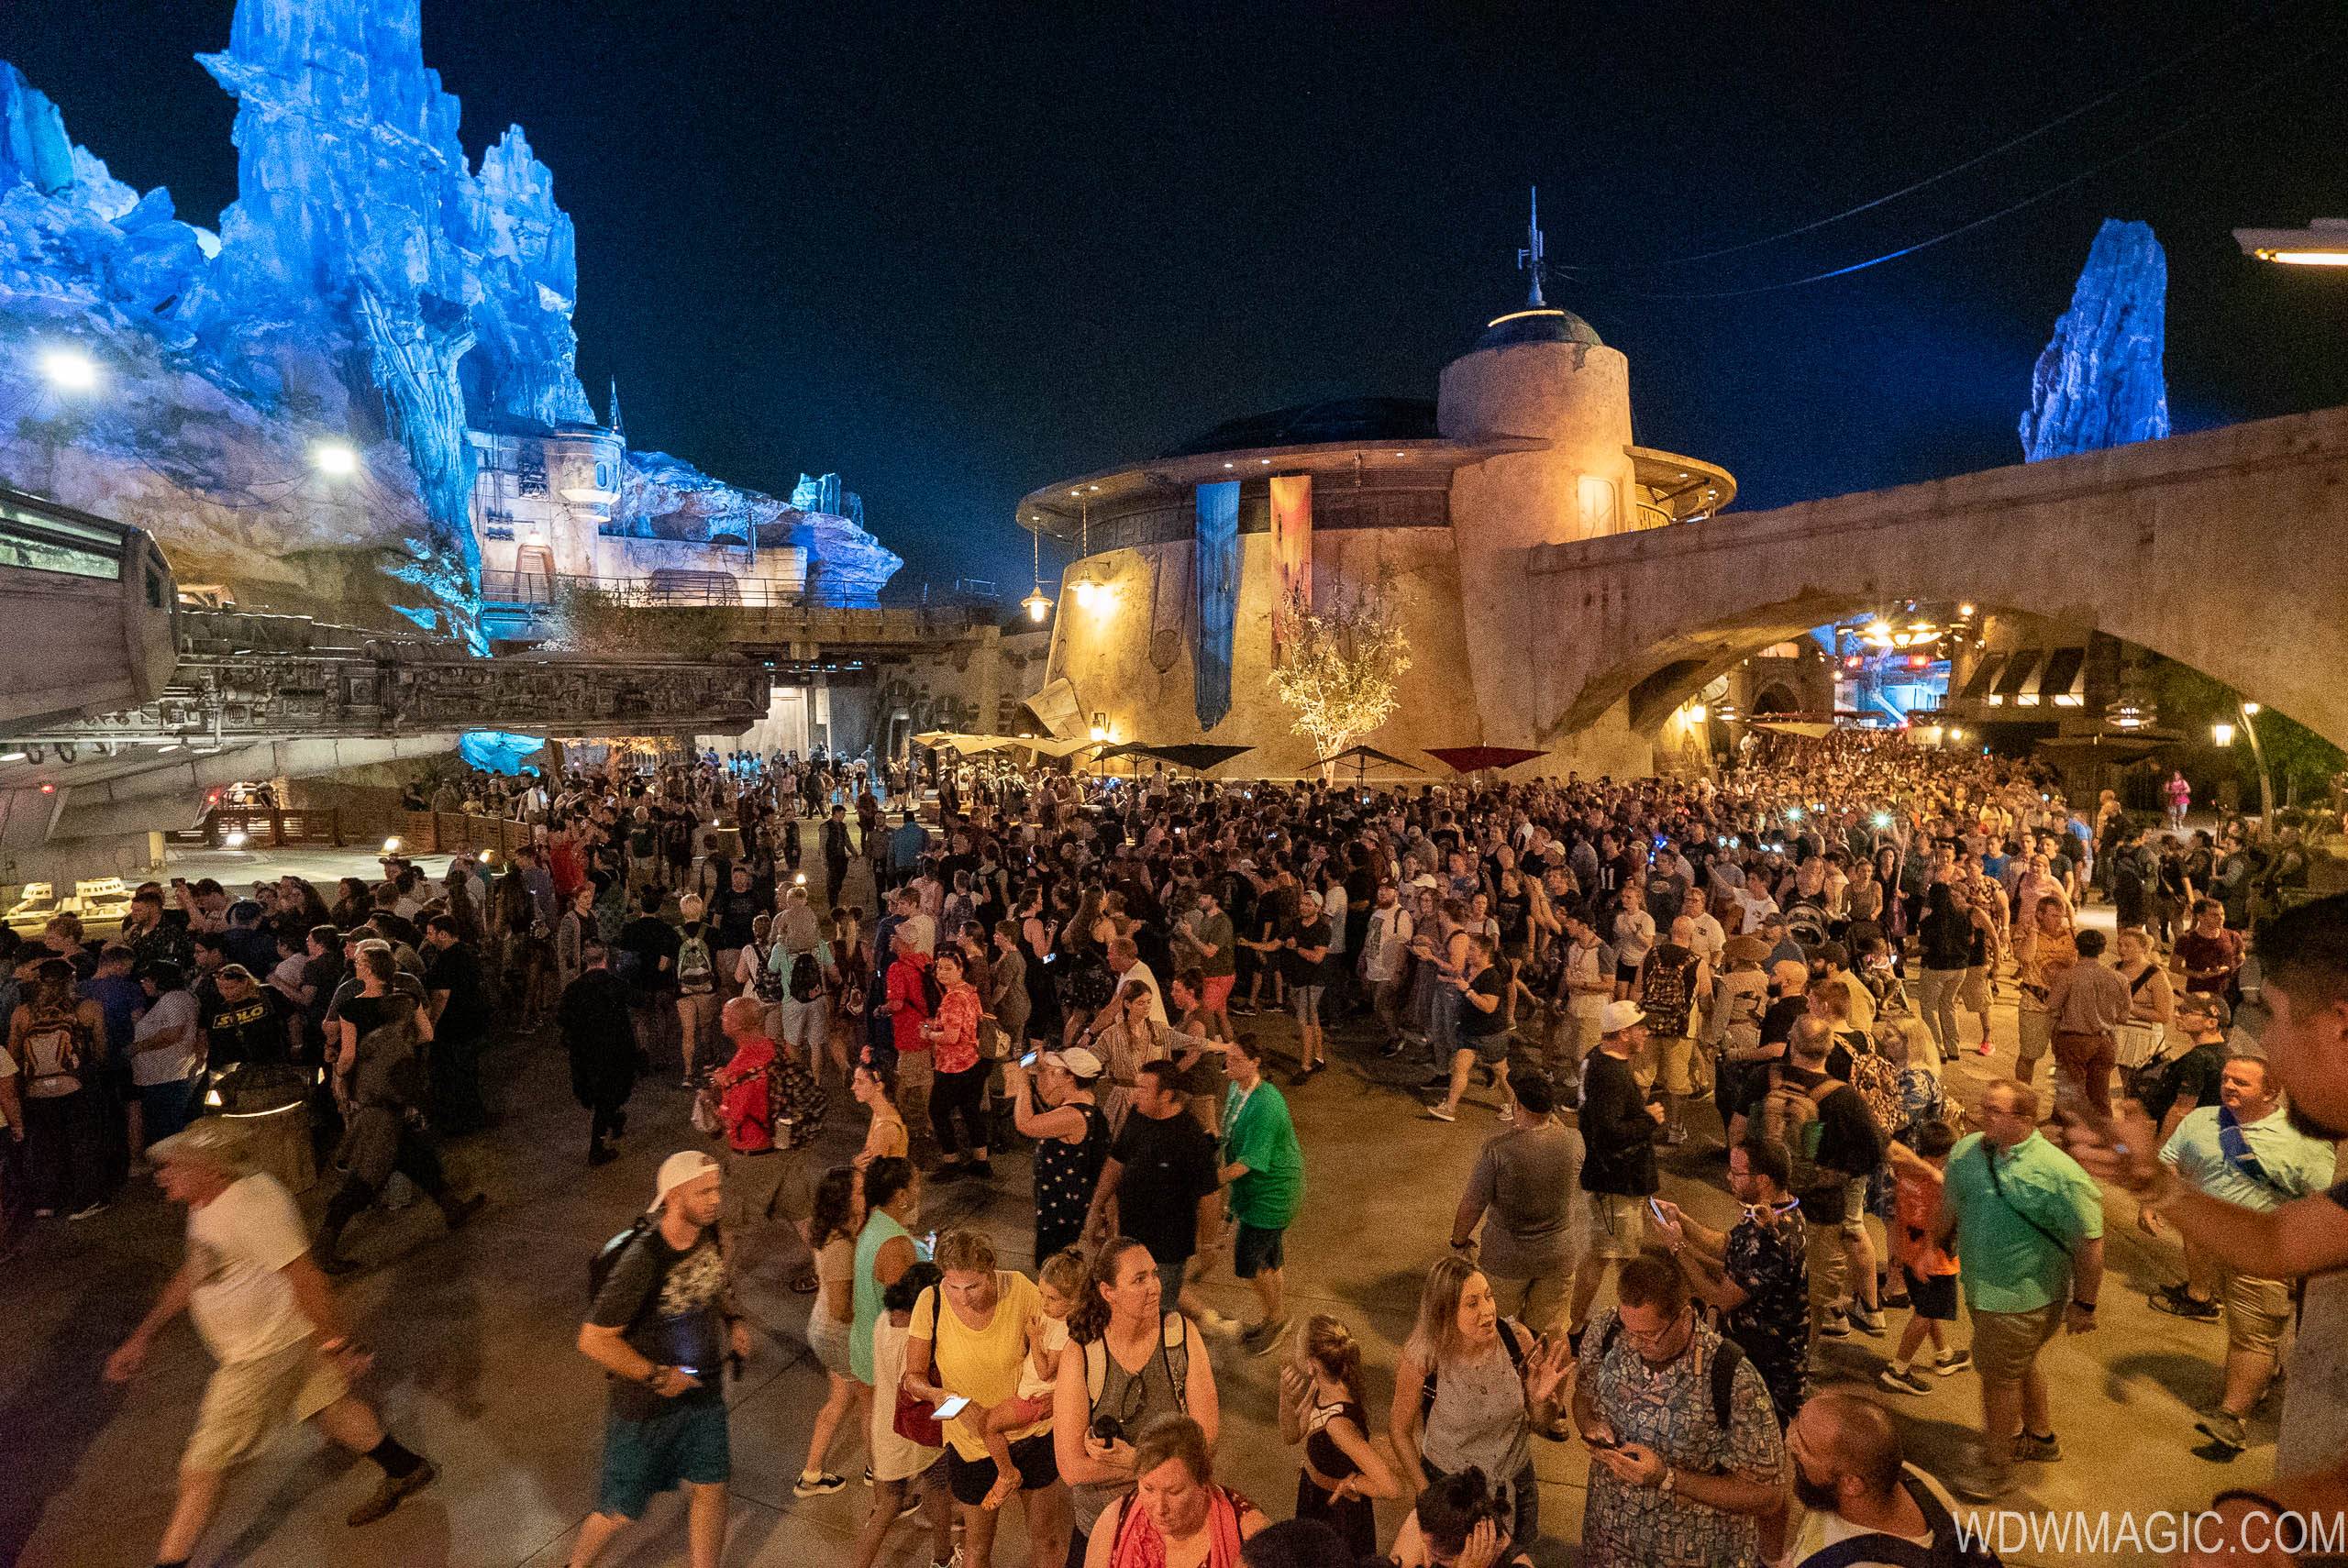 Yesterday's opening saw huge crowds at Galaxy's Edge